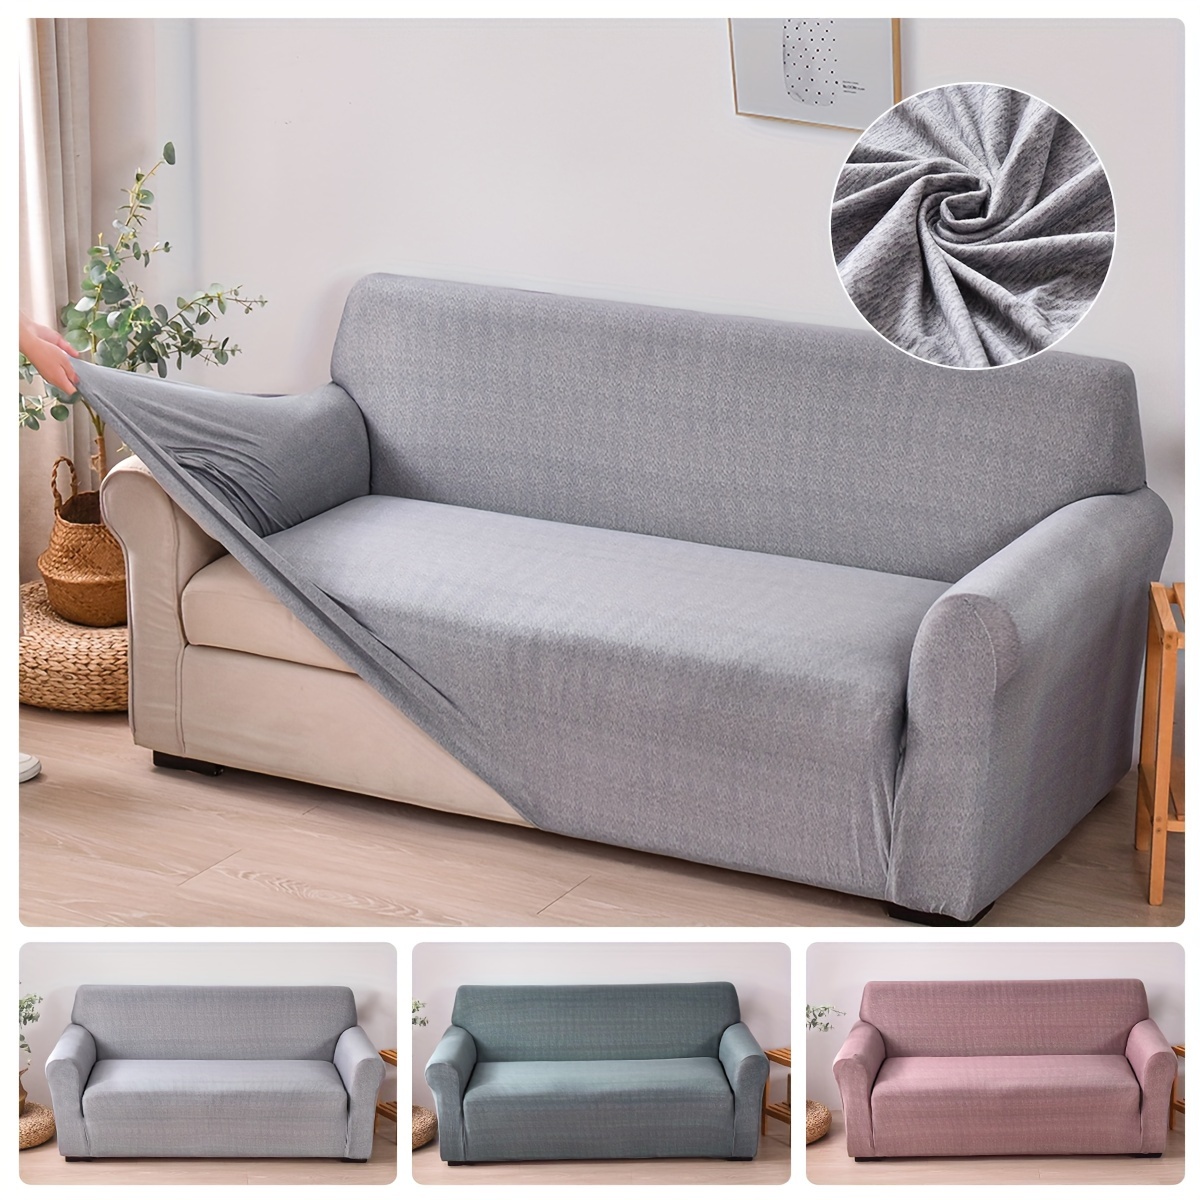 

1pc Stretch Sofa Slipcover, Non-slip Sofa Cover, Couch Cover 4 Seasons Universal Dustproof Furniture Protector For Bedroom Office Living Room Home Decor